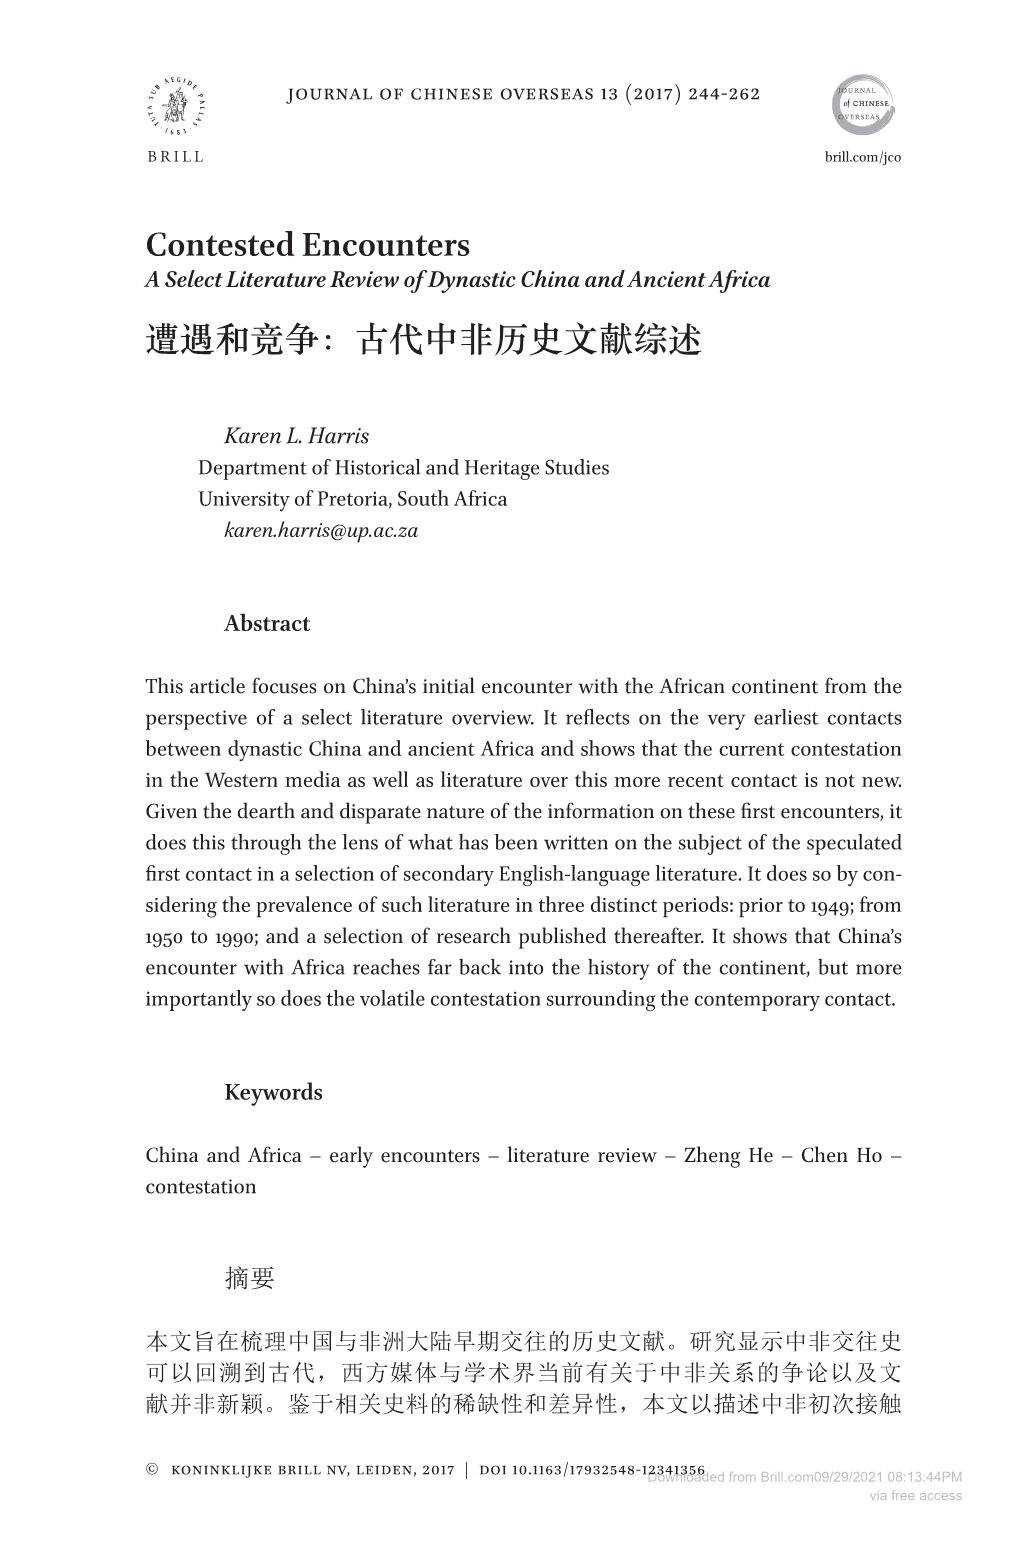 Contested Encounters a Select Literature Review of Dynastic China and Ancient Africa 遭遇和竞争：古代中非历史文献综述